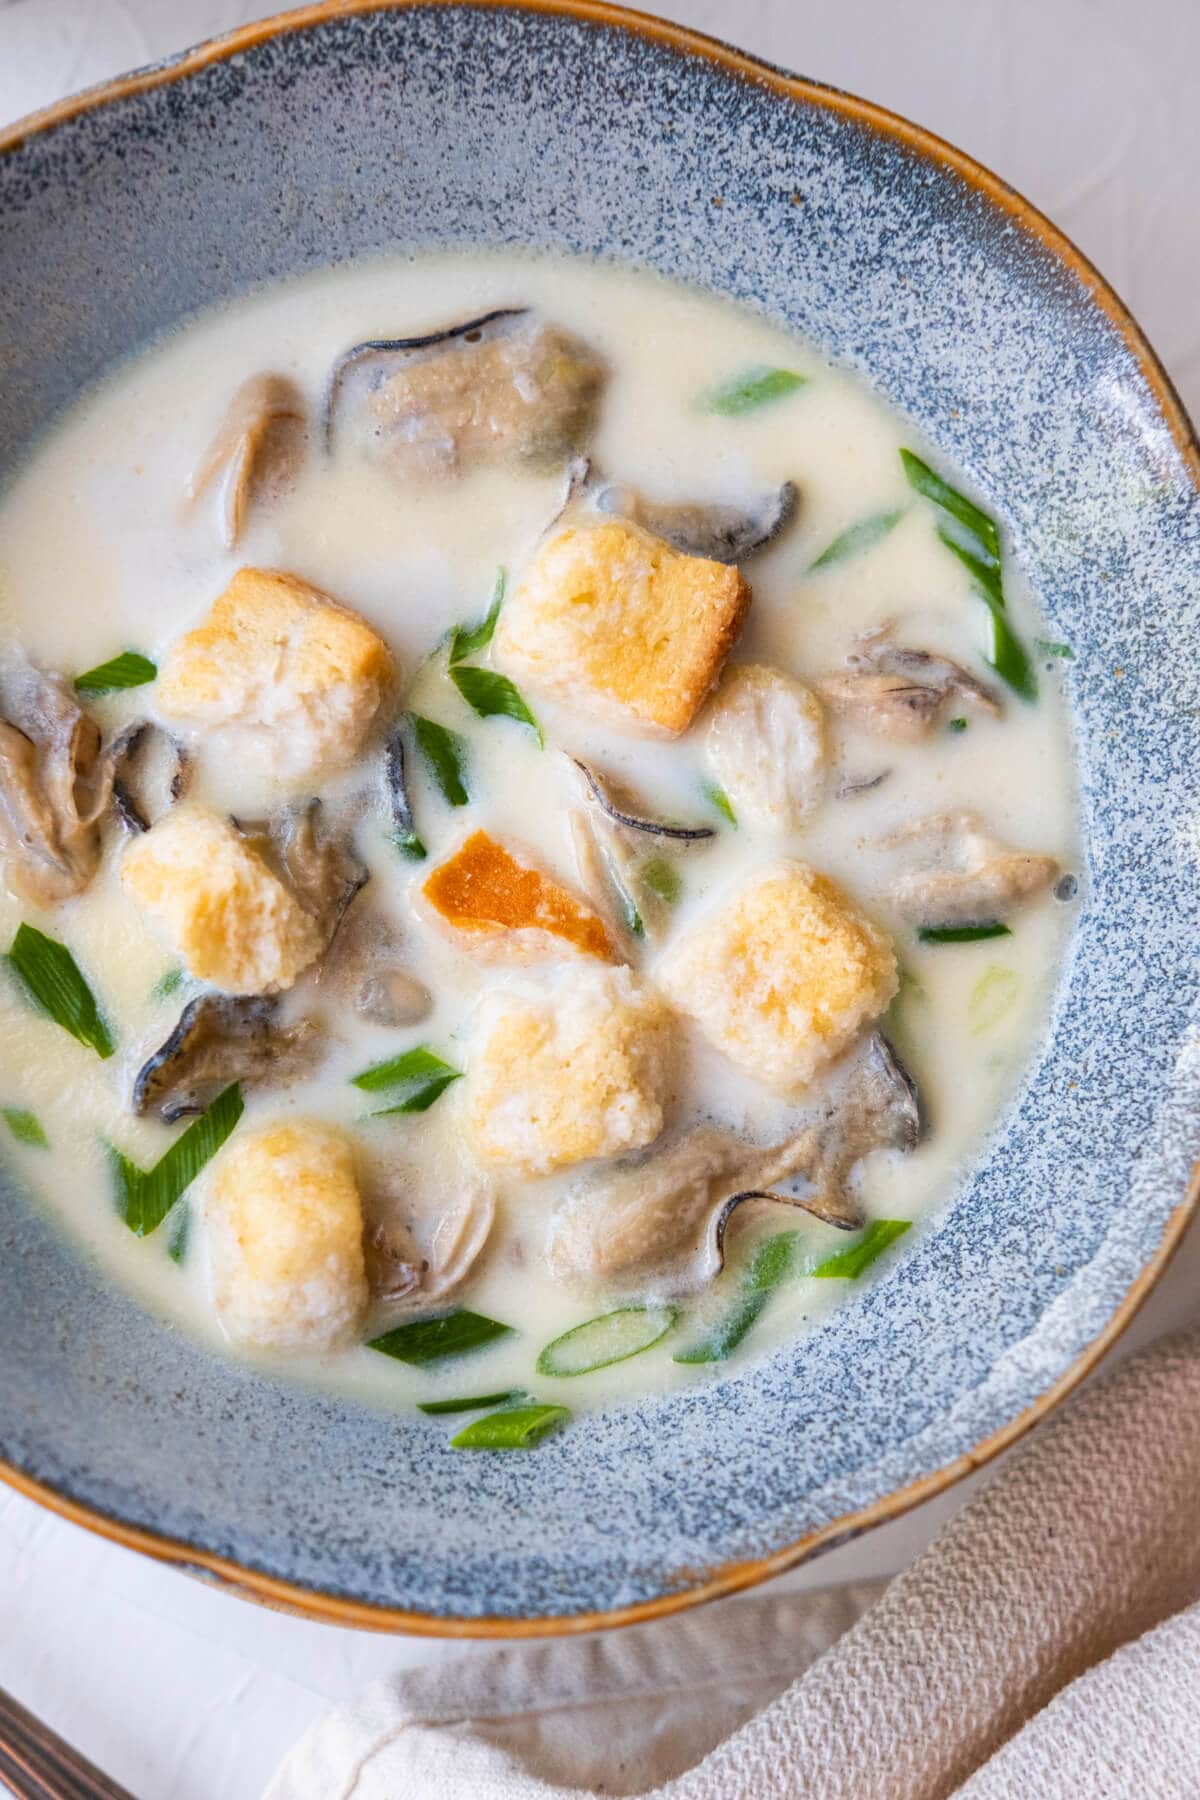 Medium-sized oysters in a rich milk broth and topped with croutons.  